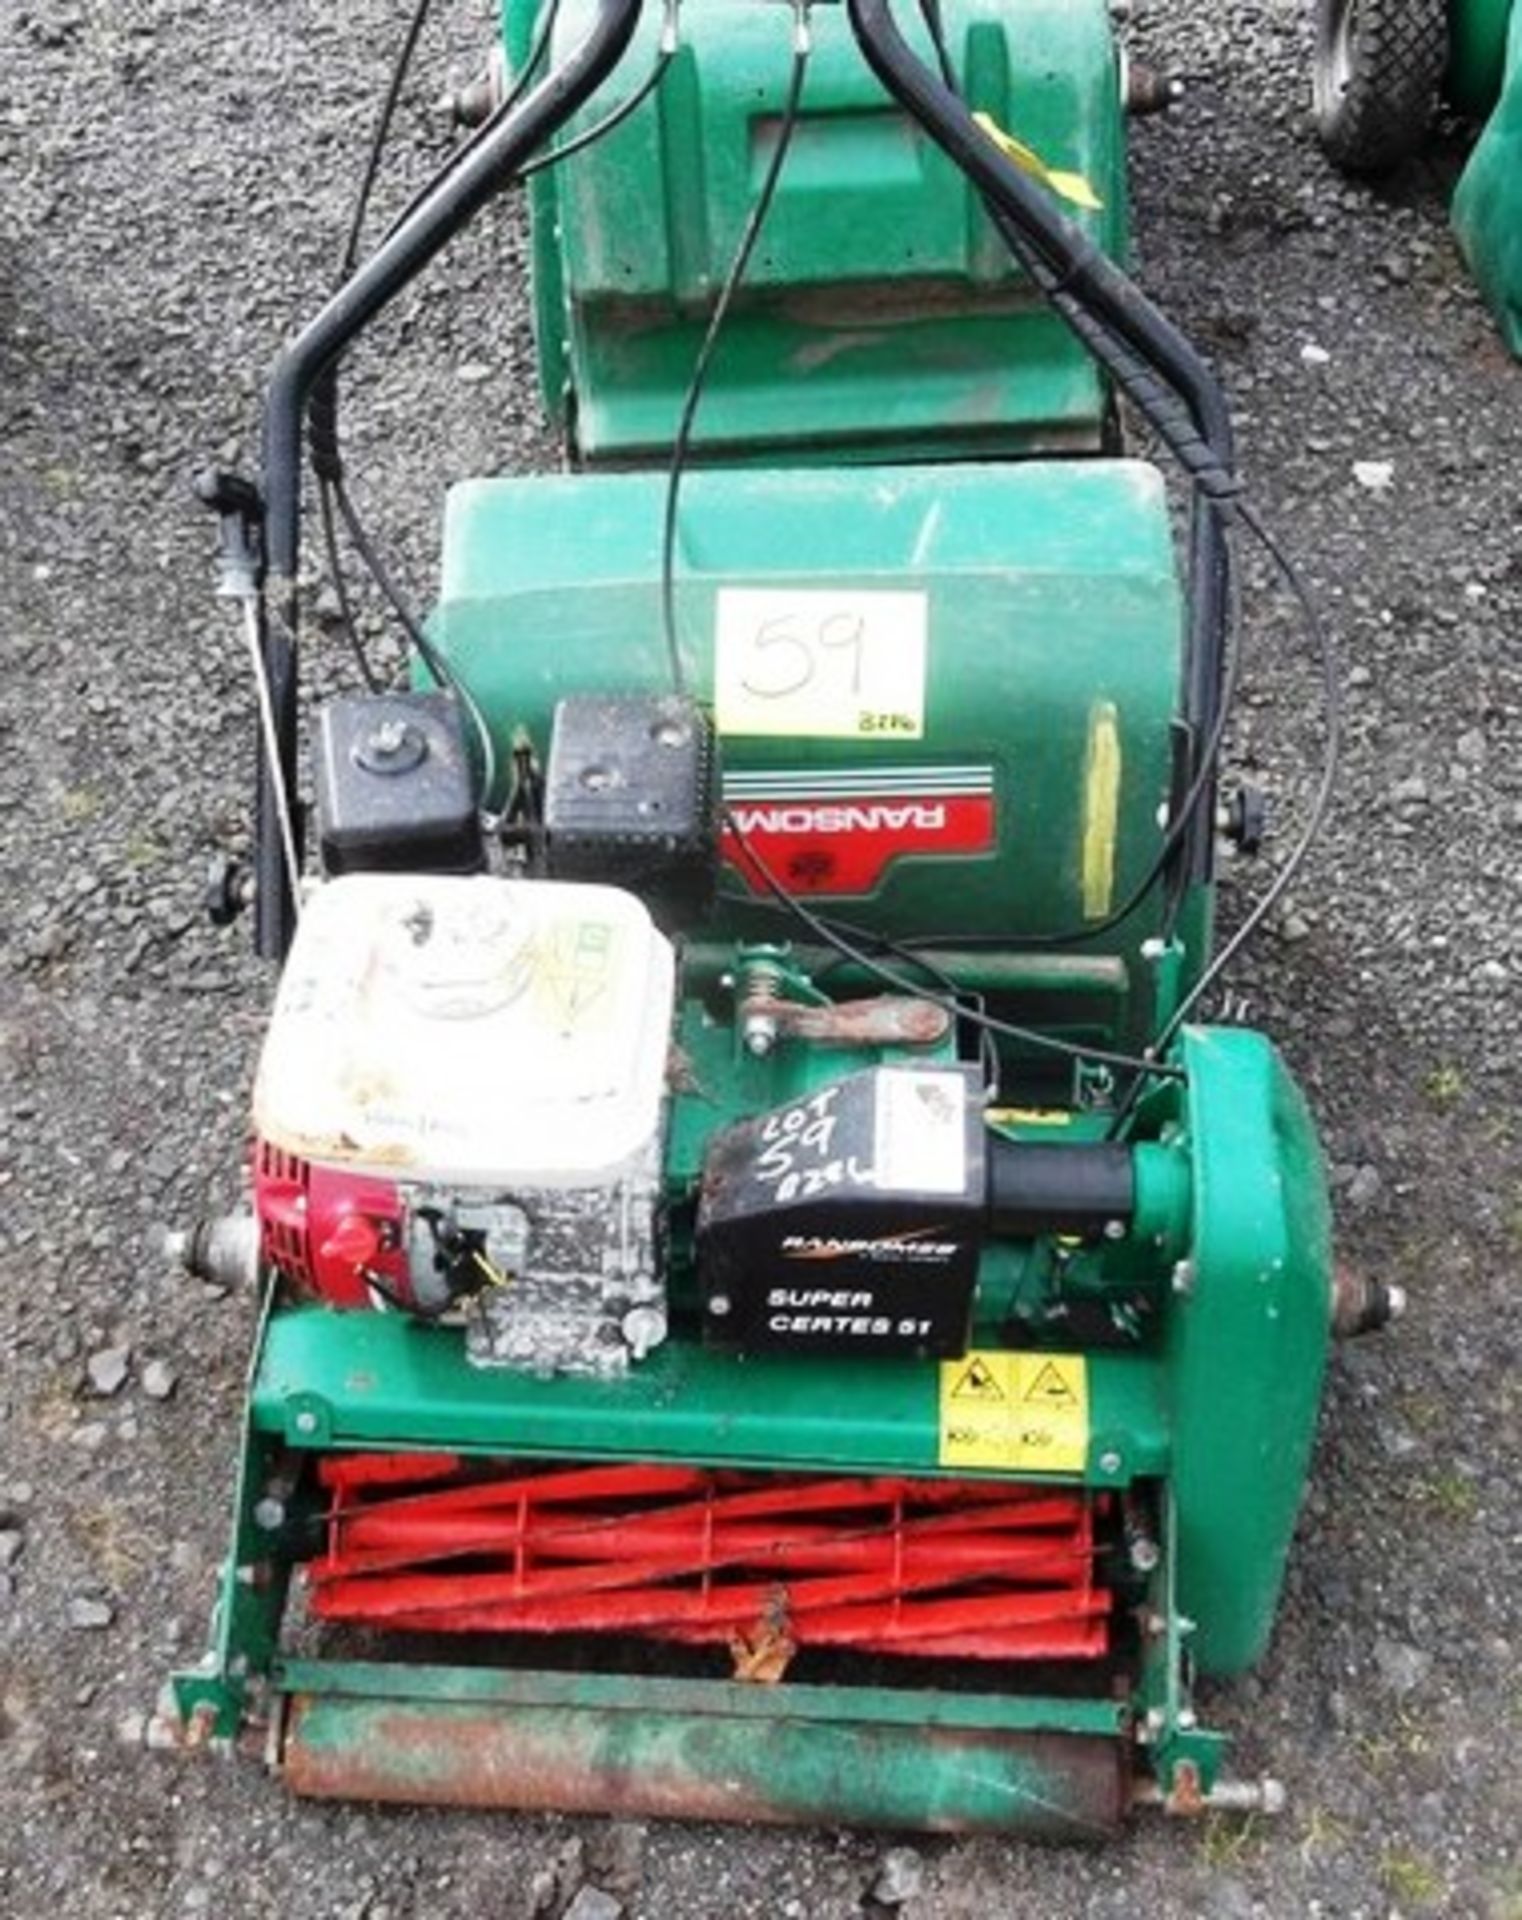 RANSOMES SUPER CERTES 51 LAWNMOWER WITH GRASS BOX